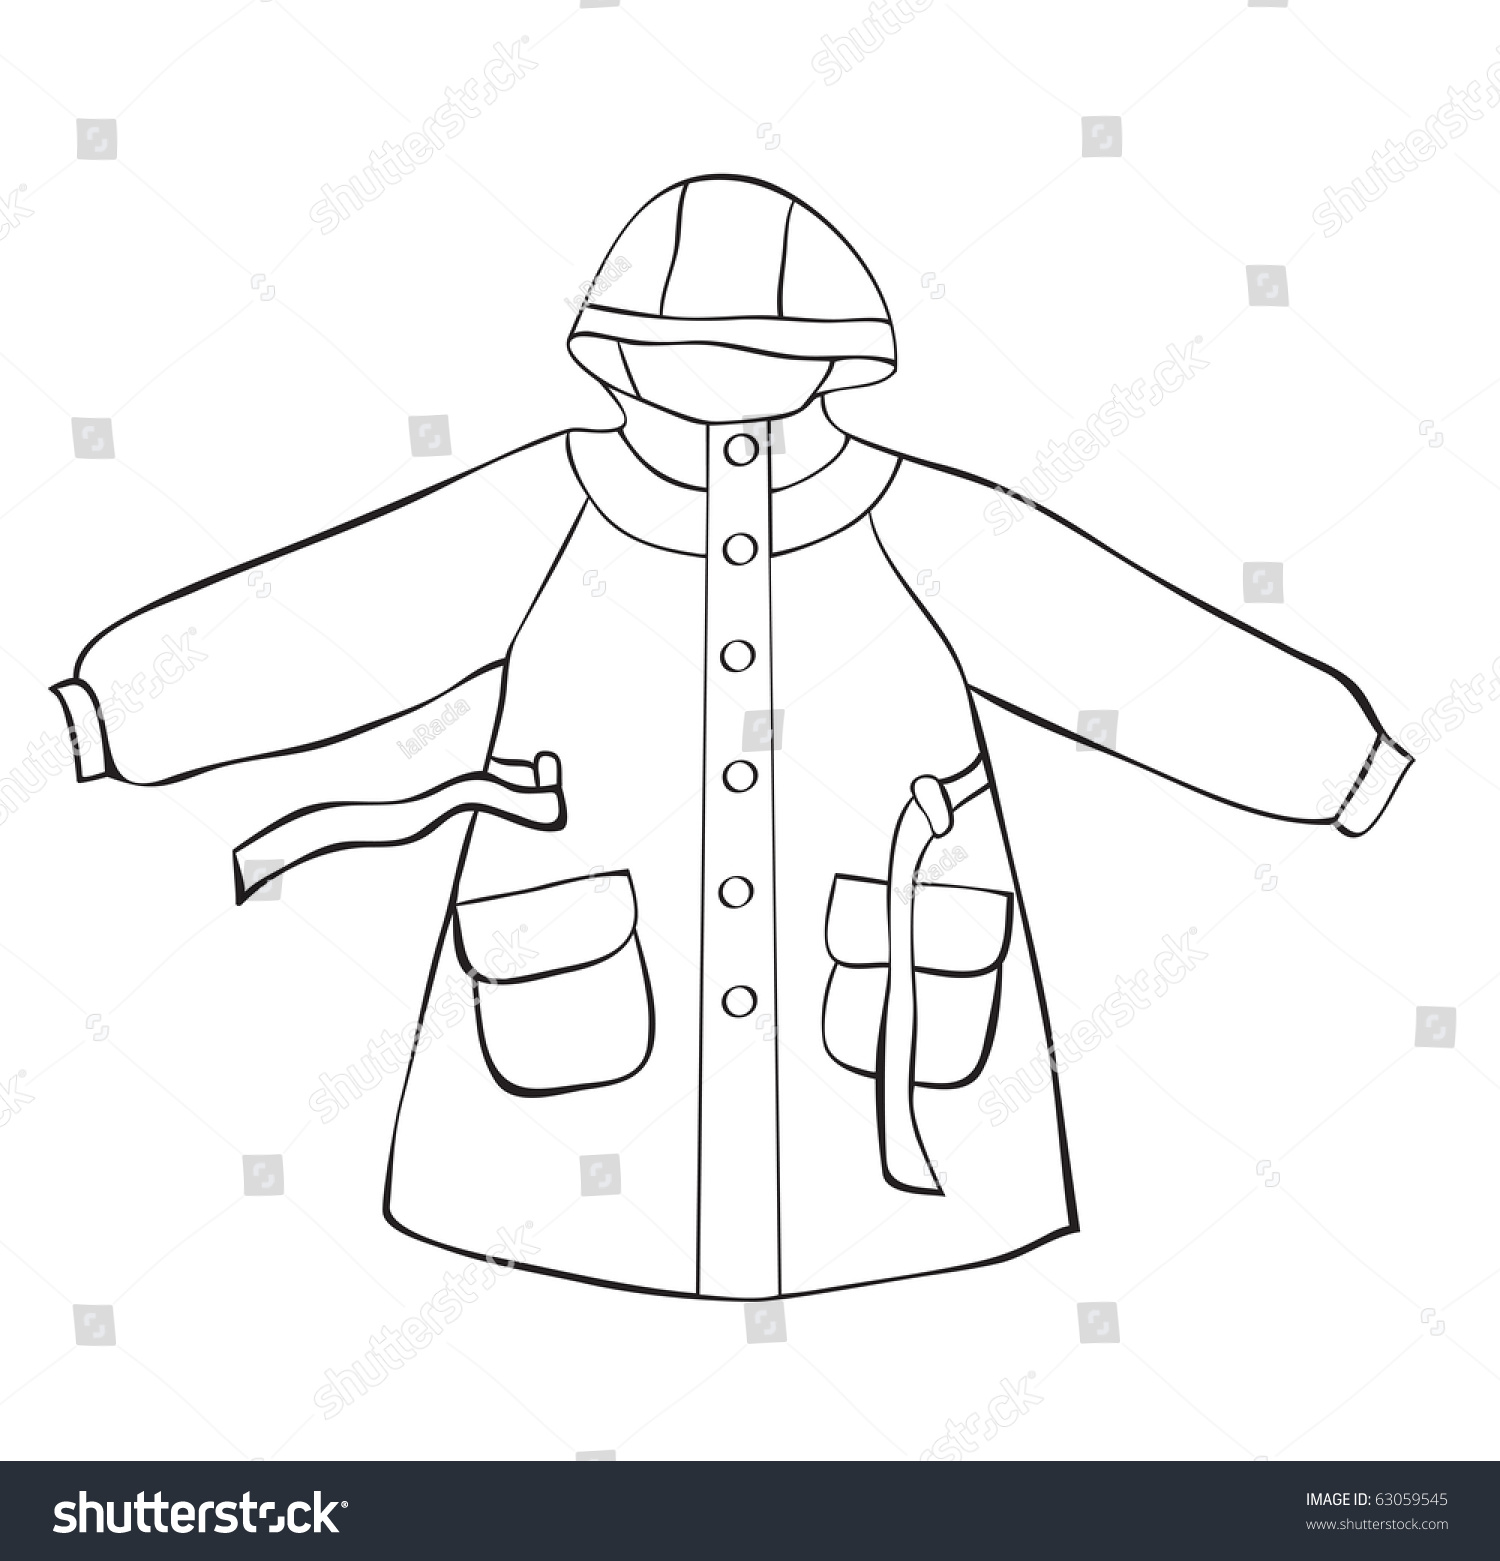 Rain Coat With Hood Isolated On White. Outline Drawing Stock Photo ...